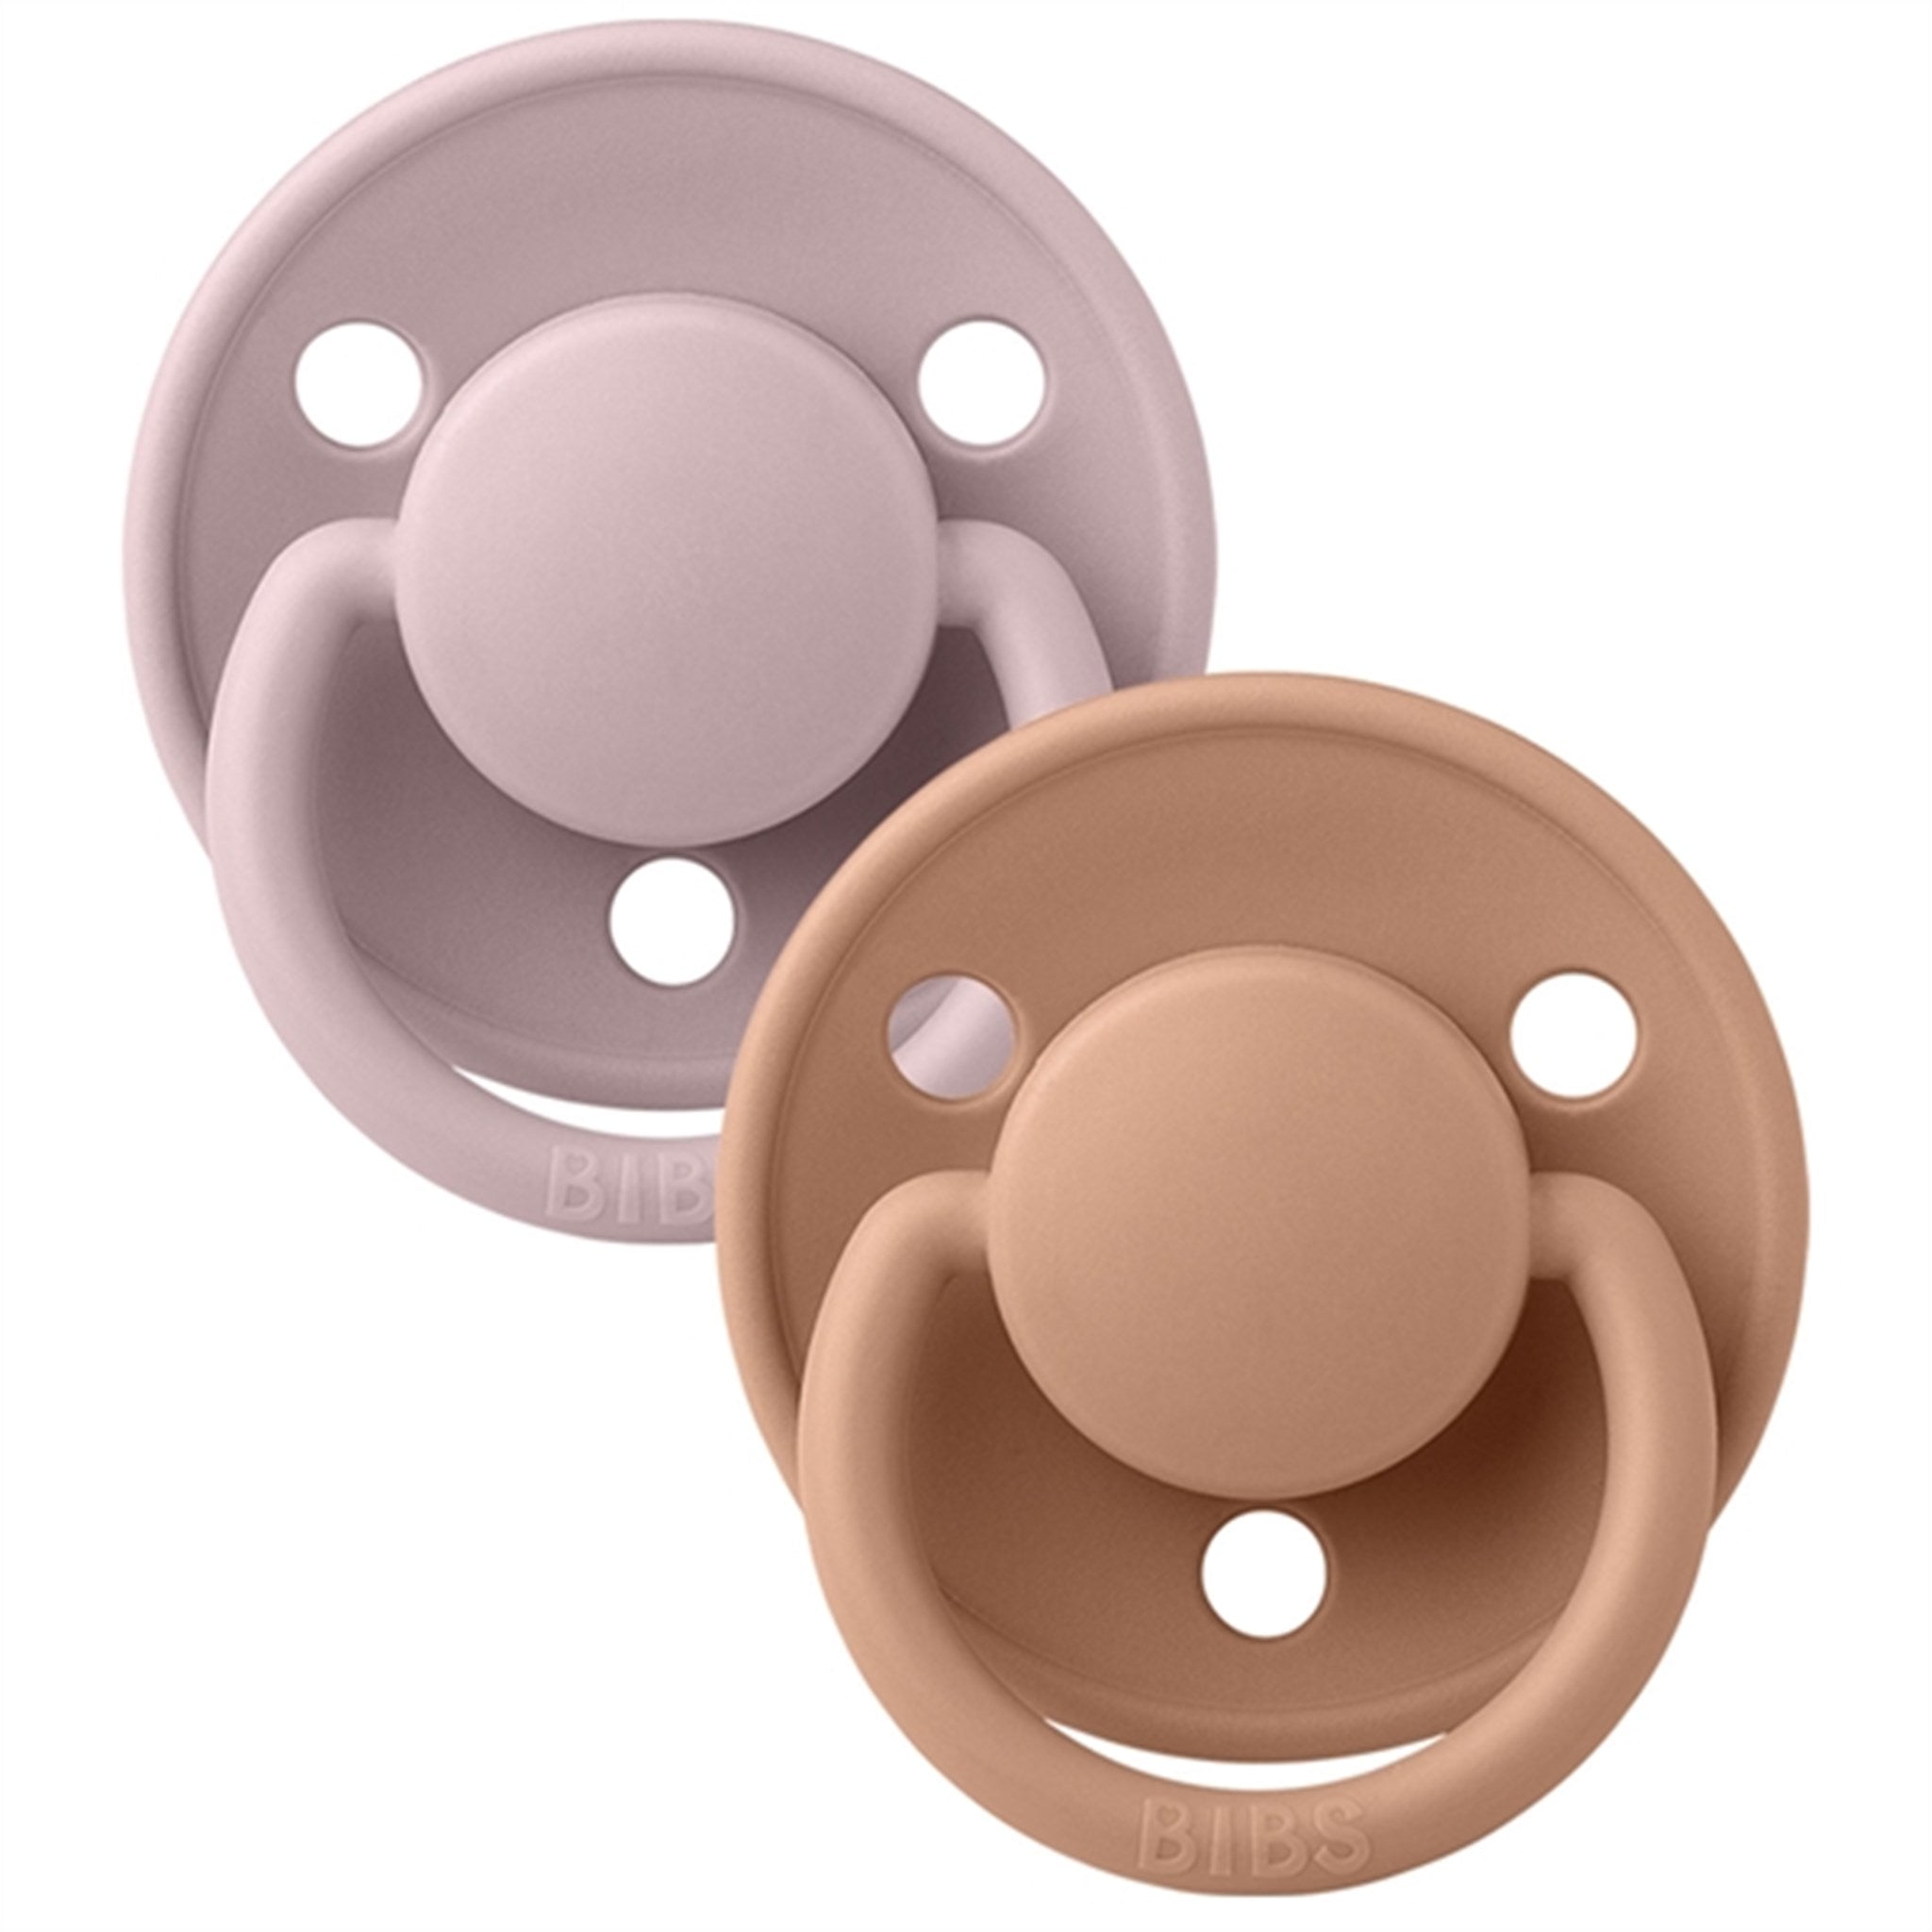 Bibs De Lux Silicone Pacifiers 2-pack Round Pink Plum/Peach